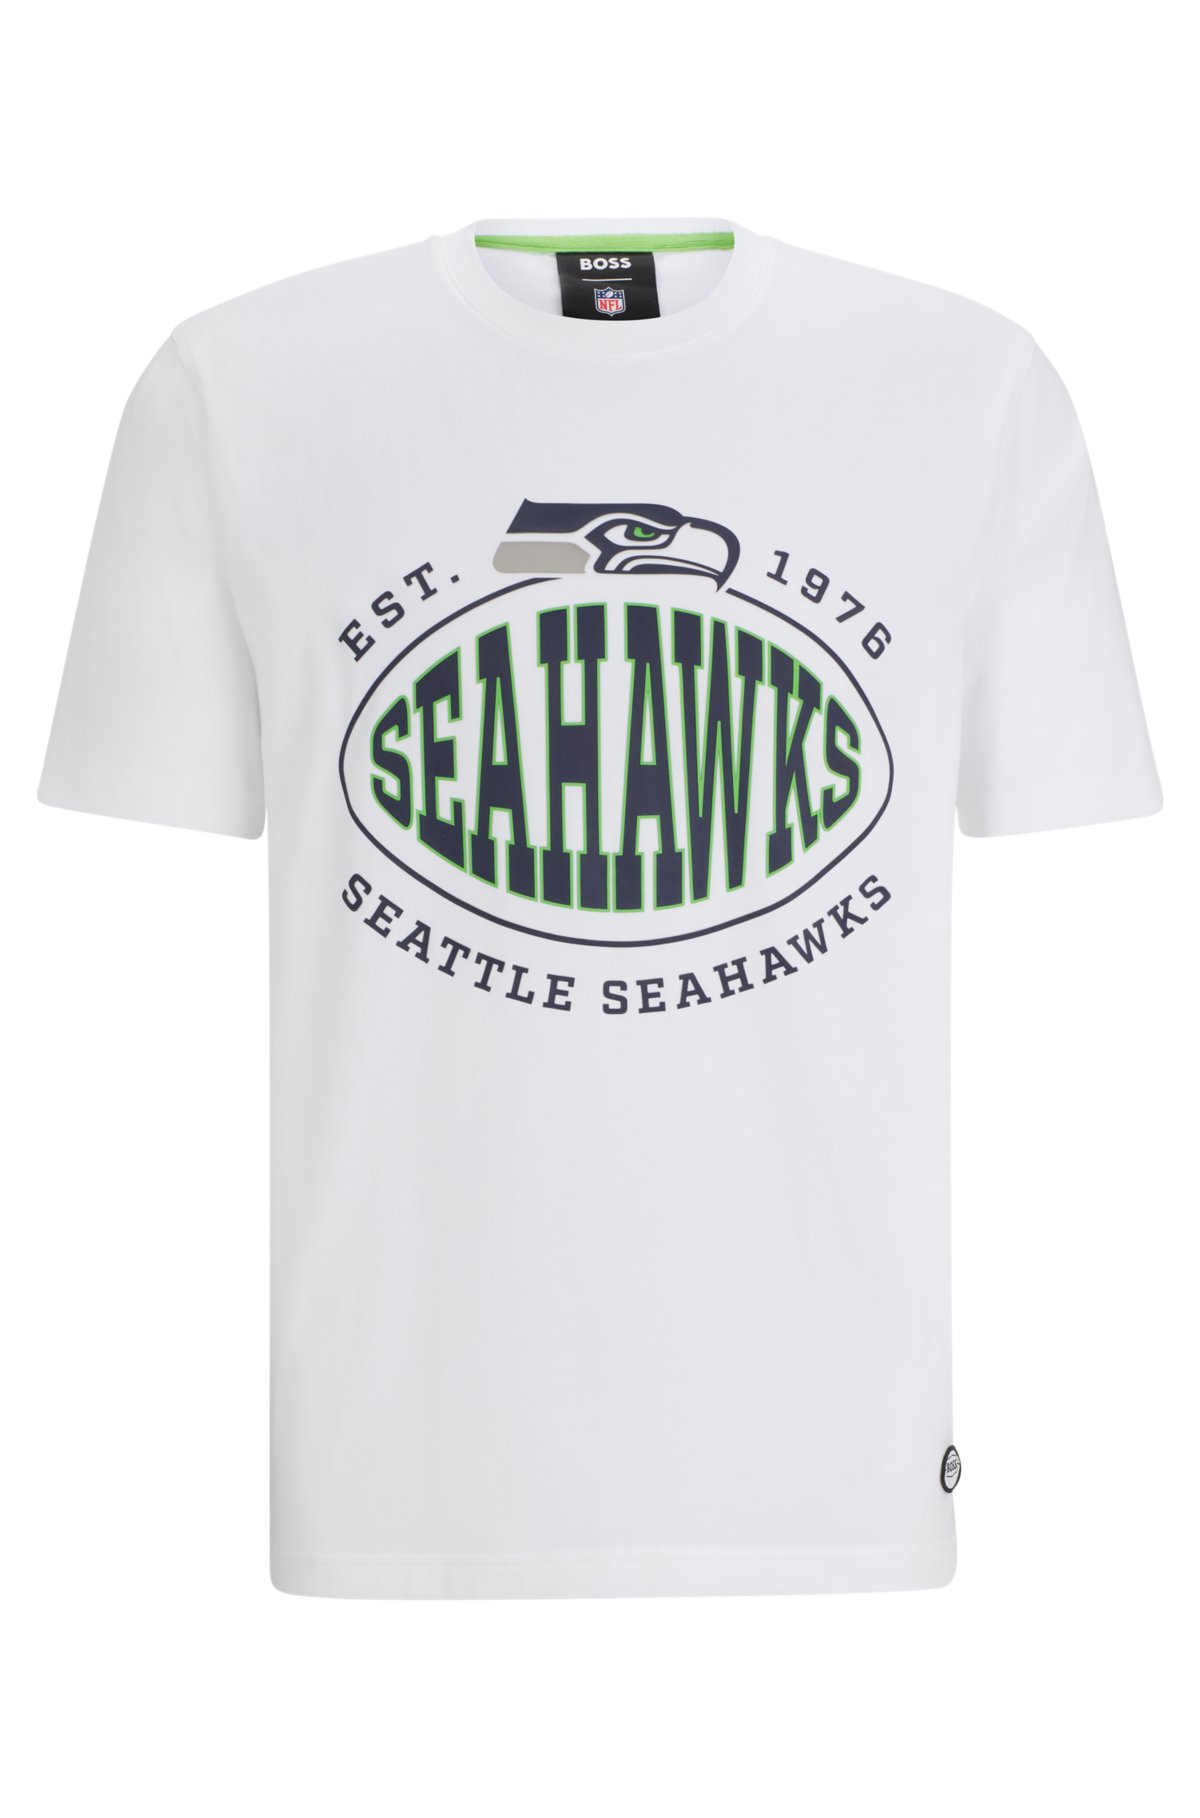  BOSS x NFL stretch-cotton T-shirt with collaborative branding, Seahawks